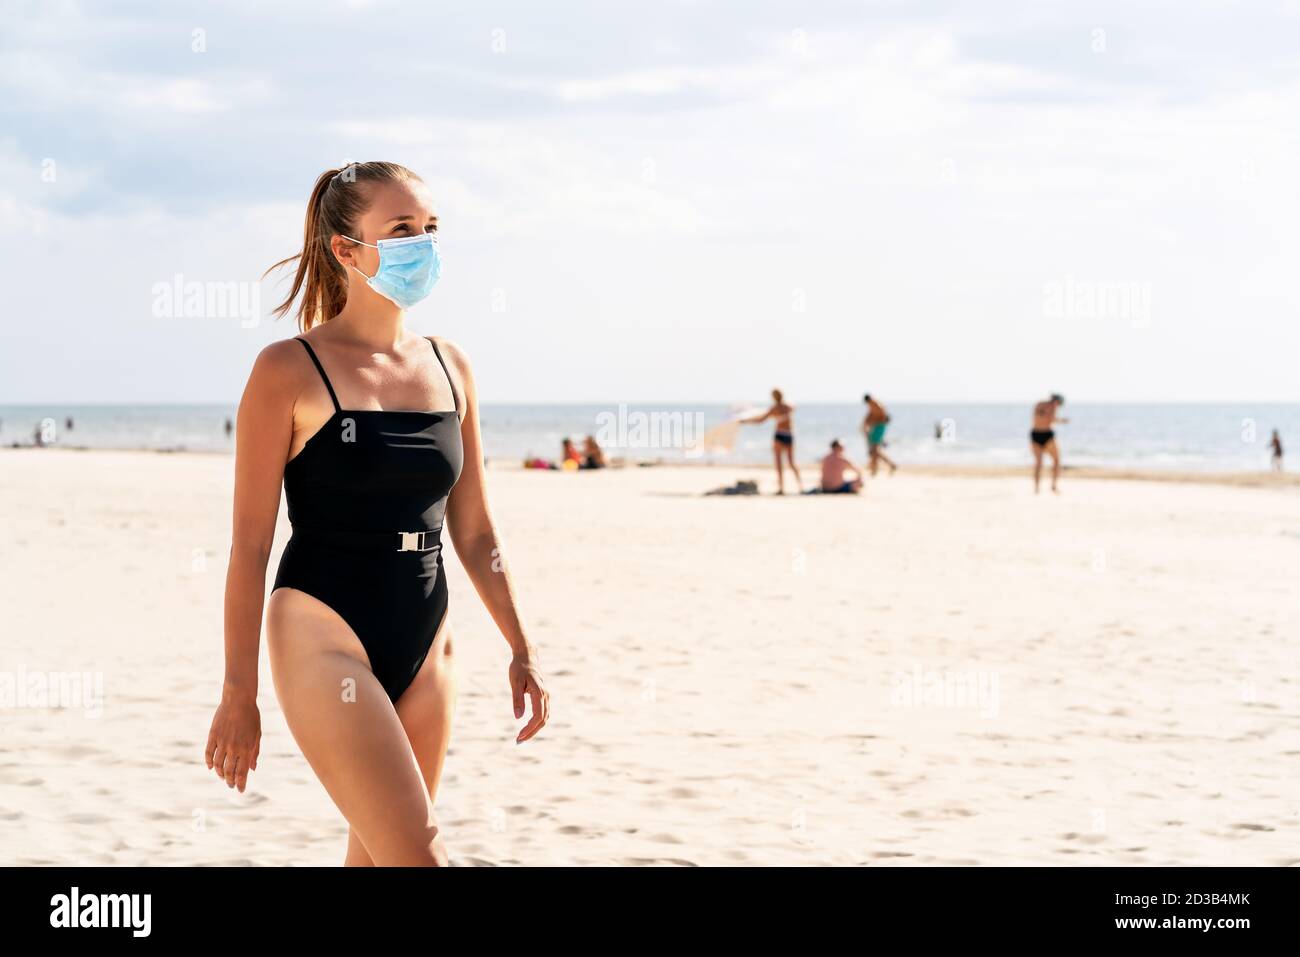 Woman walking on the beach wearing a face mask to protect from corona virus. Tourist on a vacation with people in the background. Facemask on mouth. Stock Photo